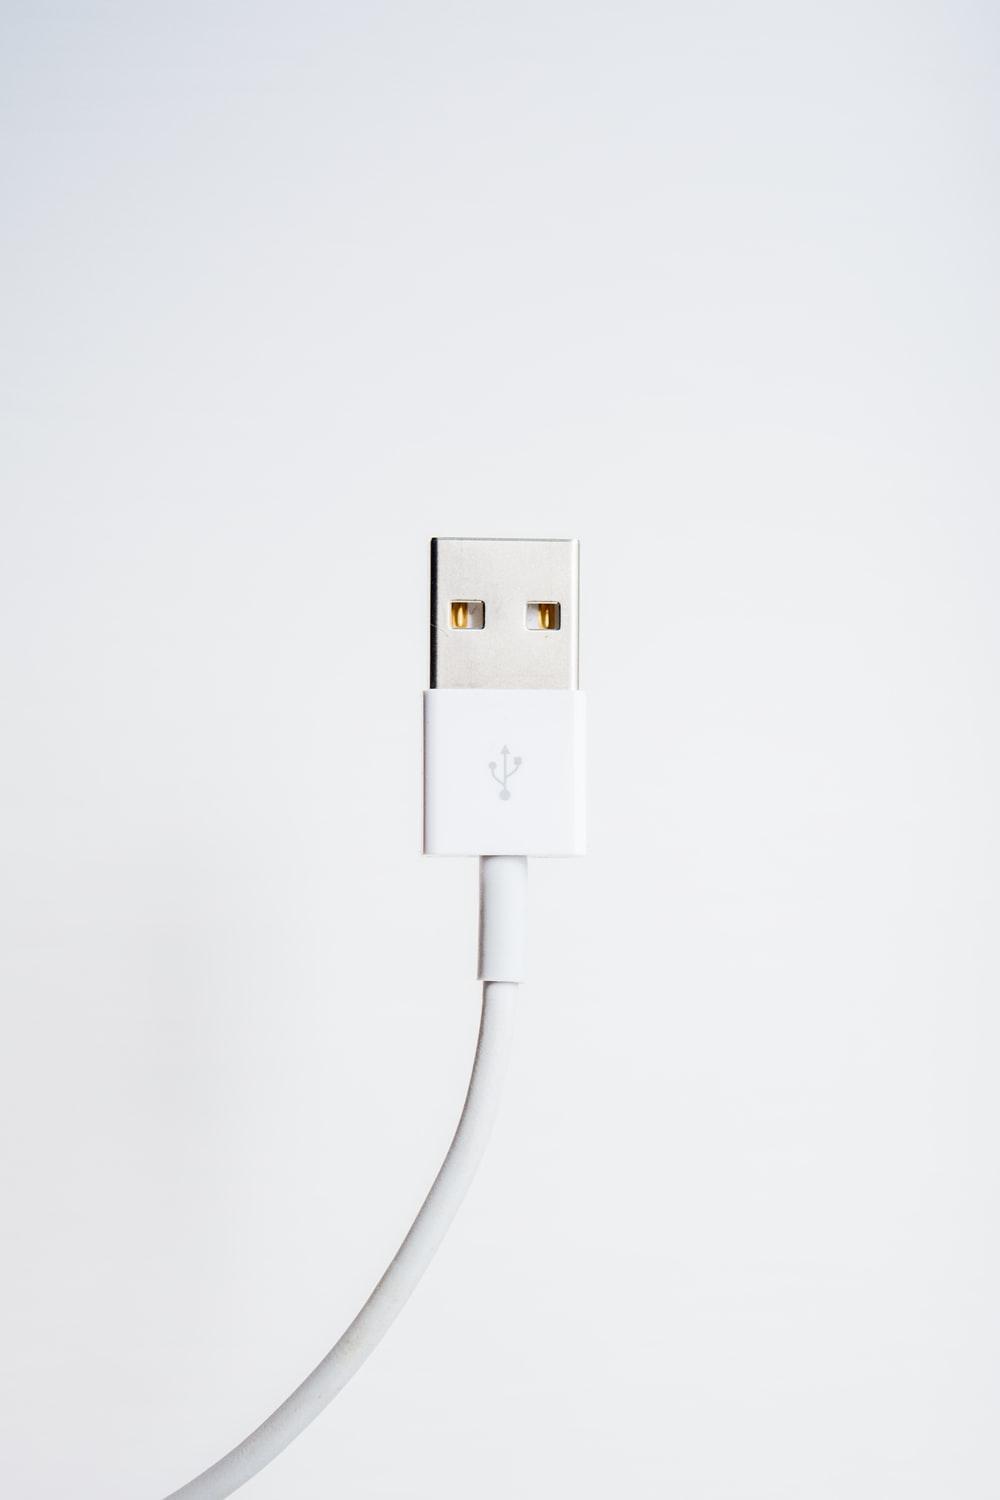 Charger Picture. Download Free Image